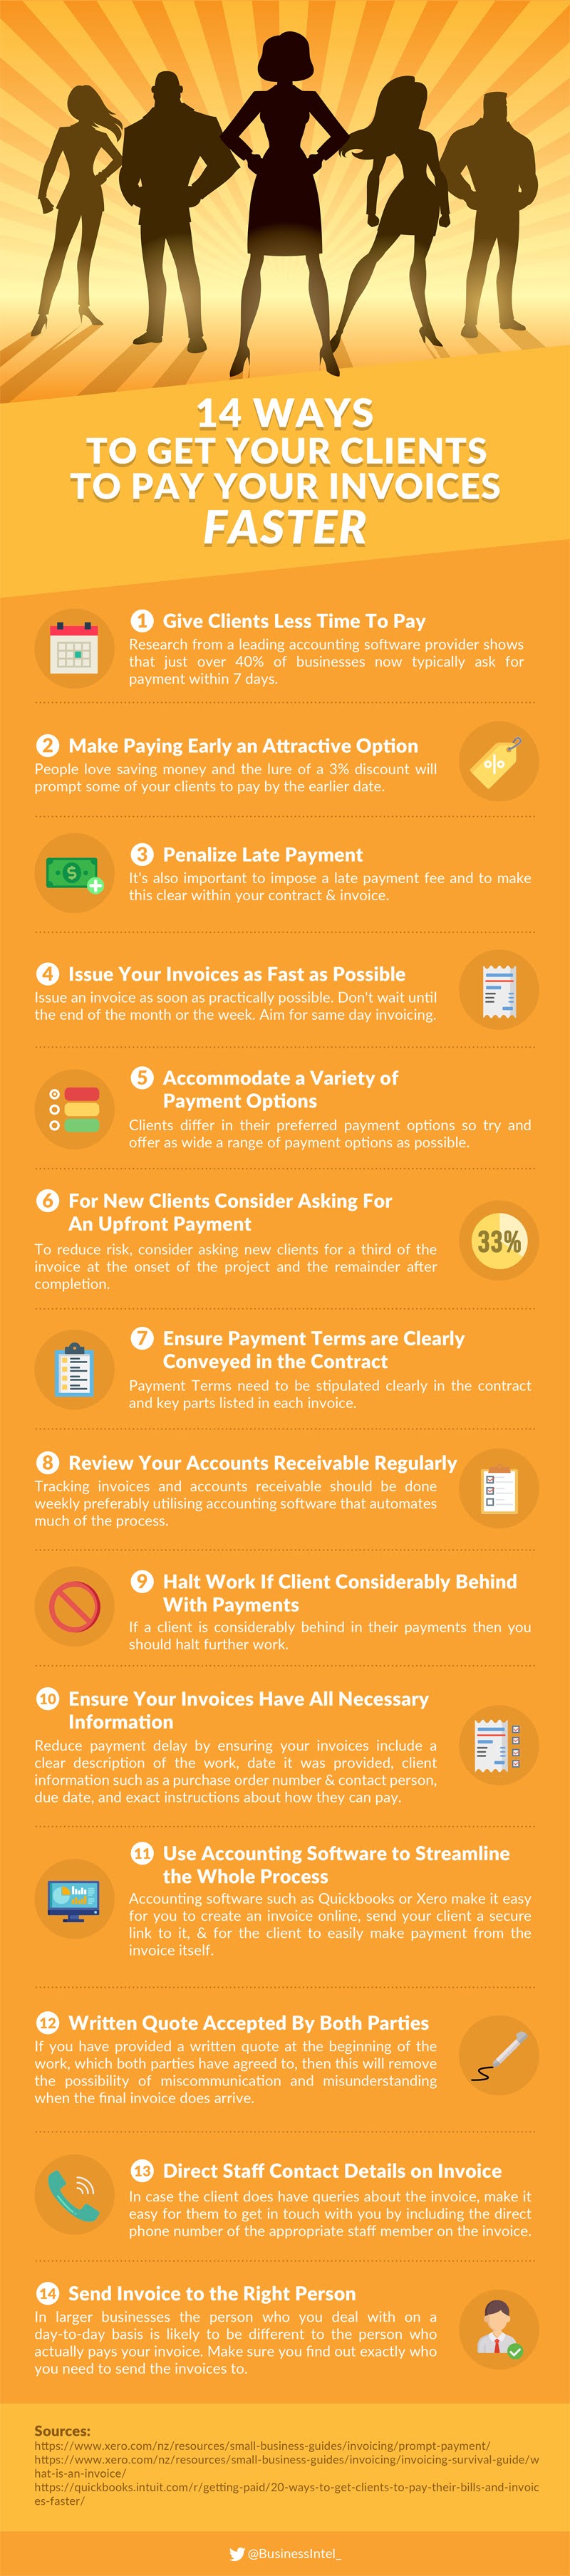 14 Ways To Get Your Clients to Pay Your Invoices Faster #infographic